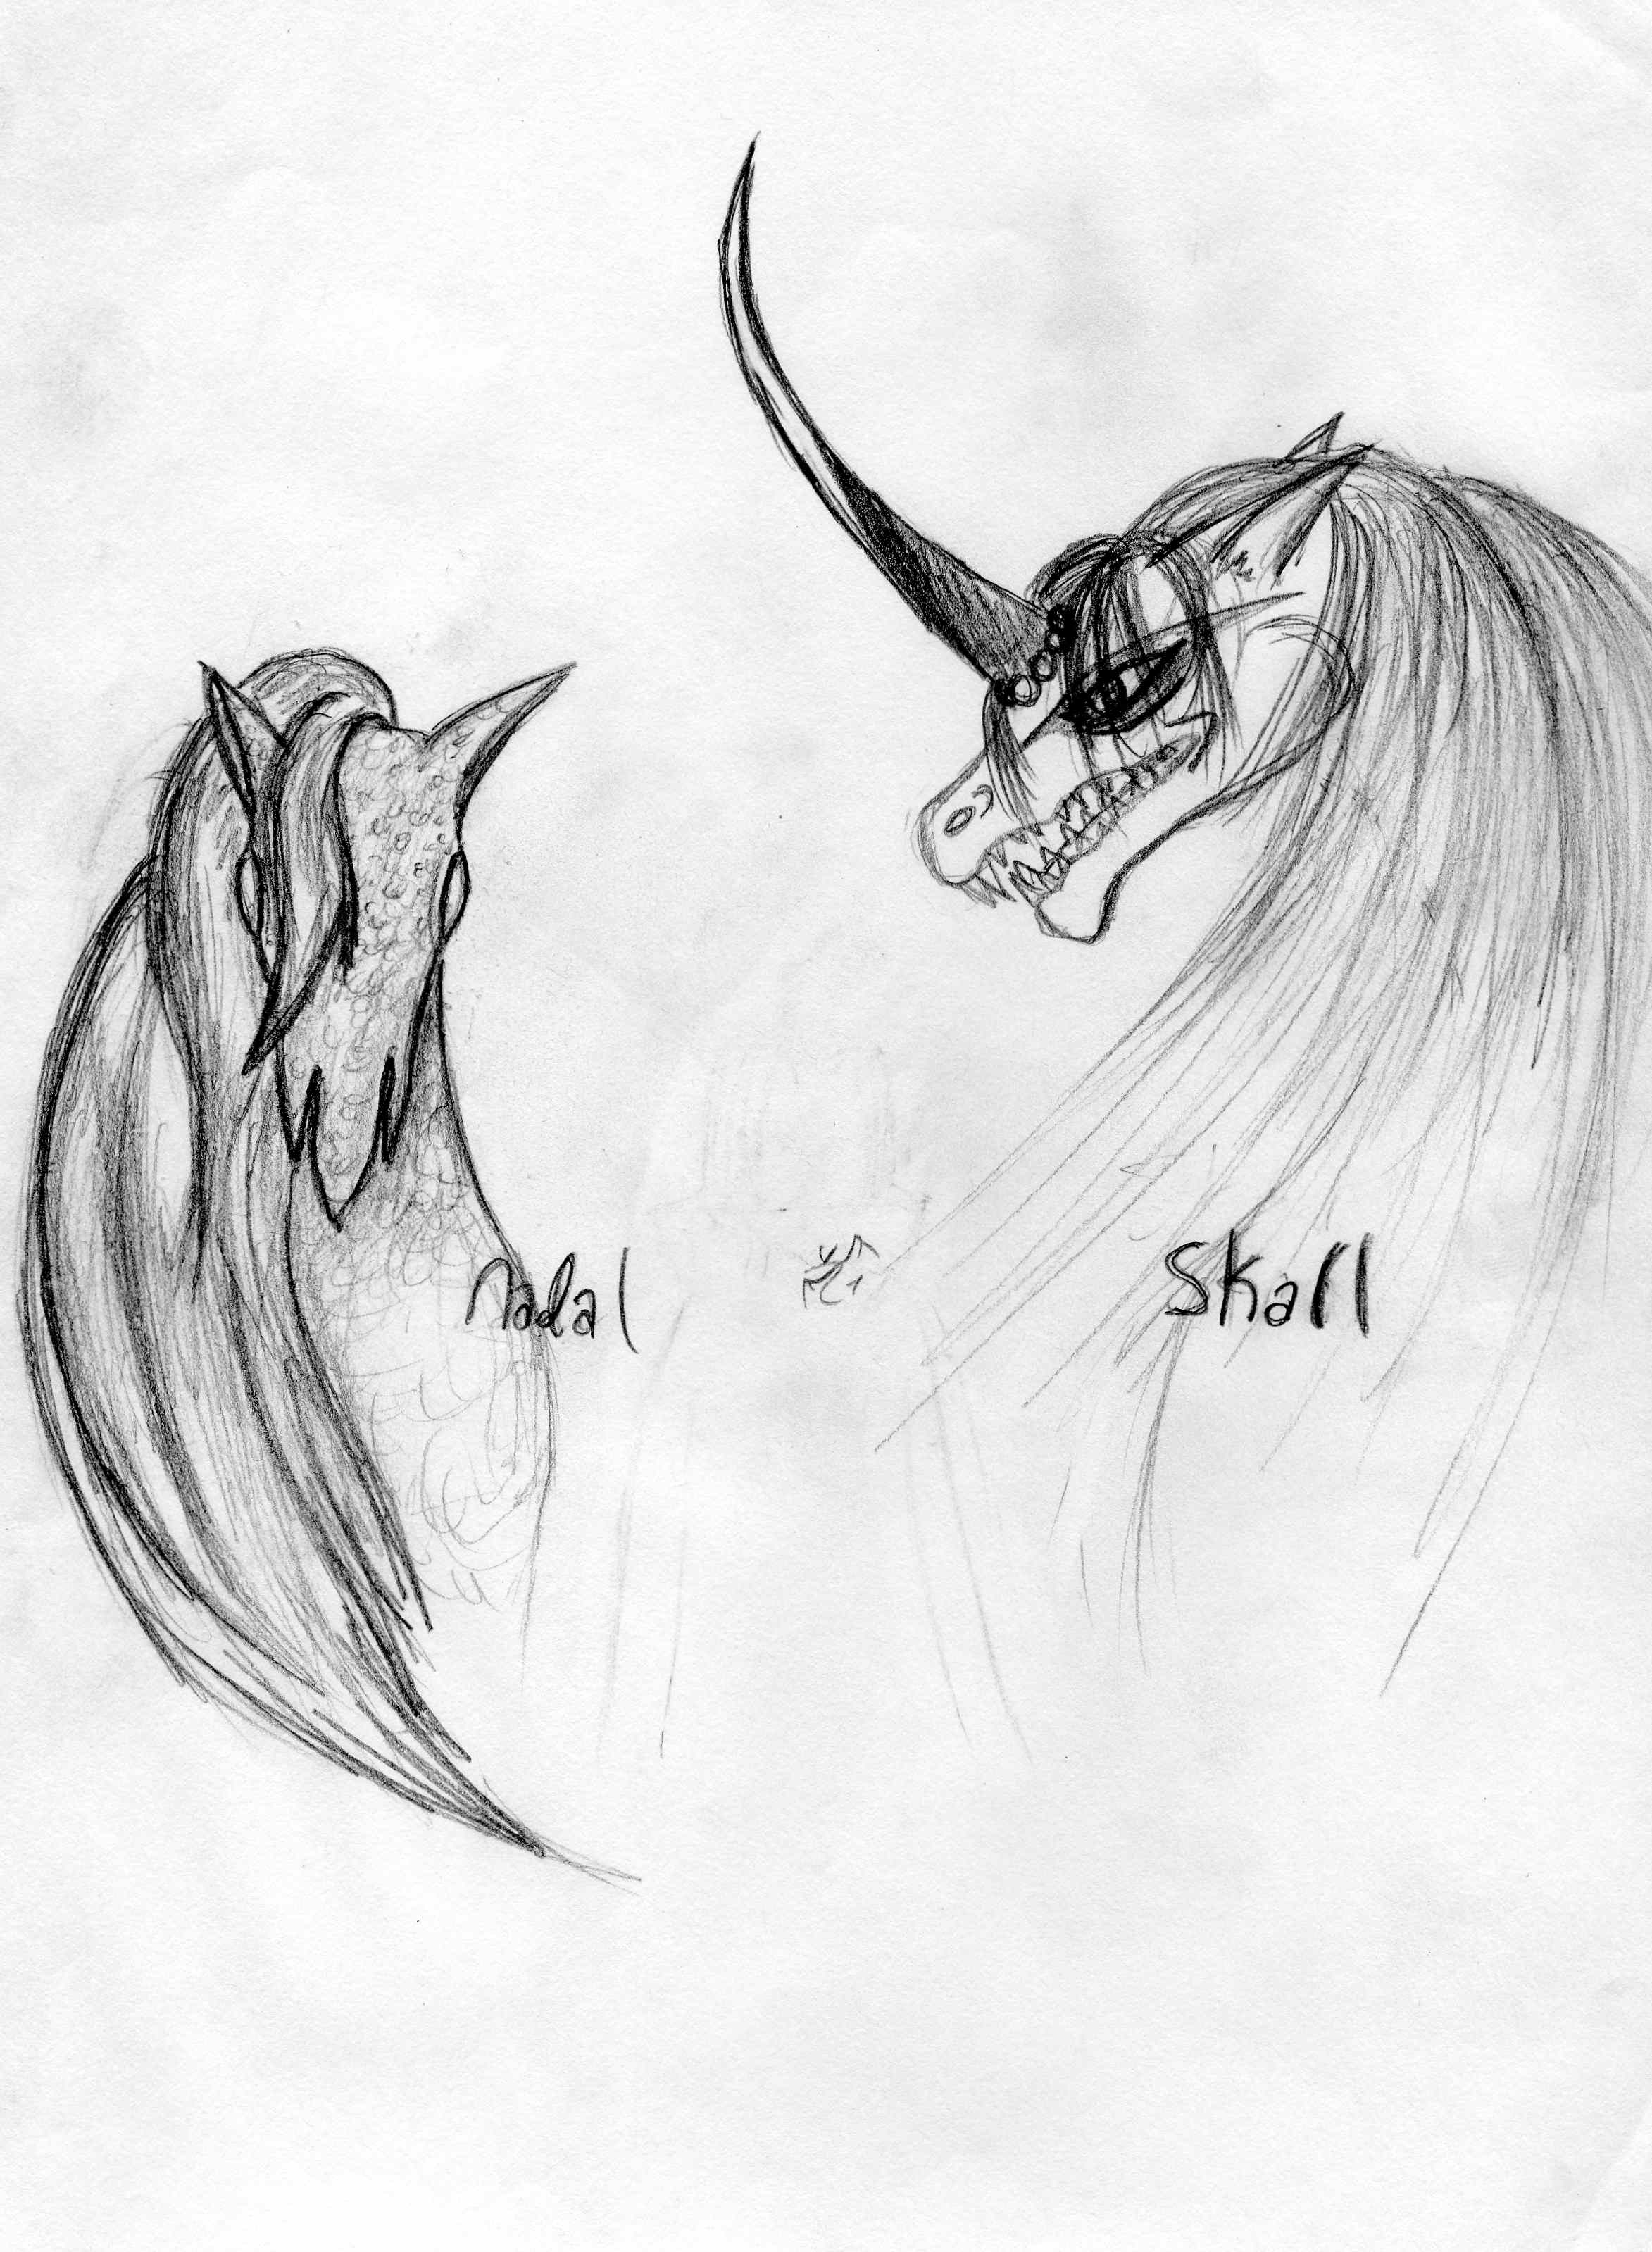 Nadal and Skall by UndeadDragoness